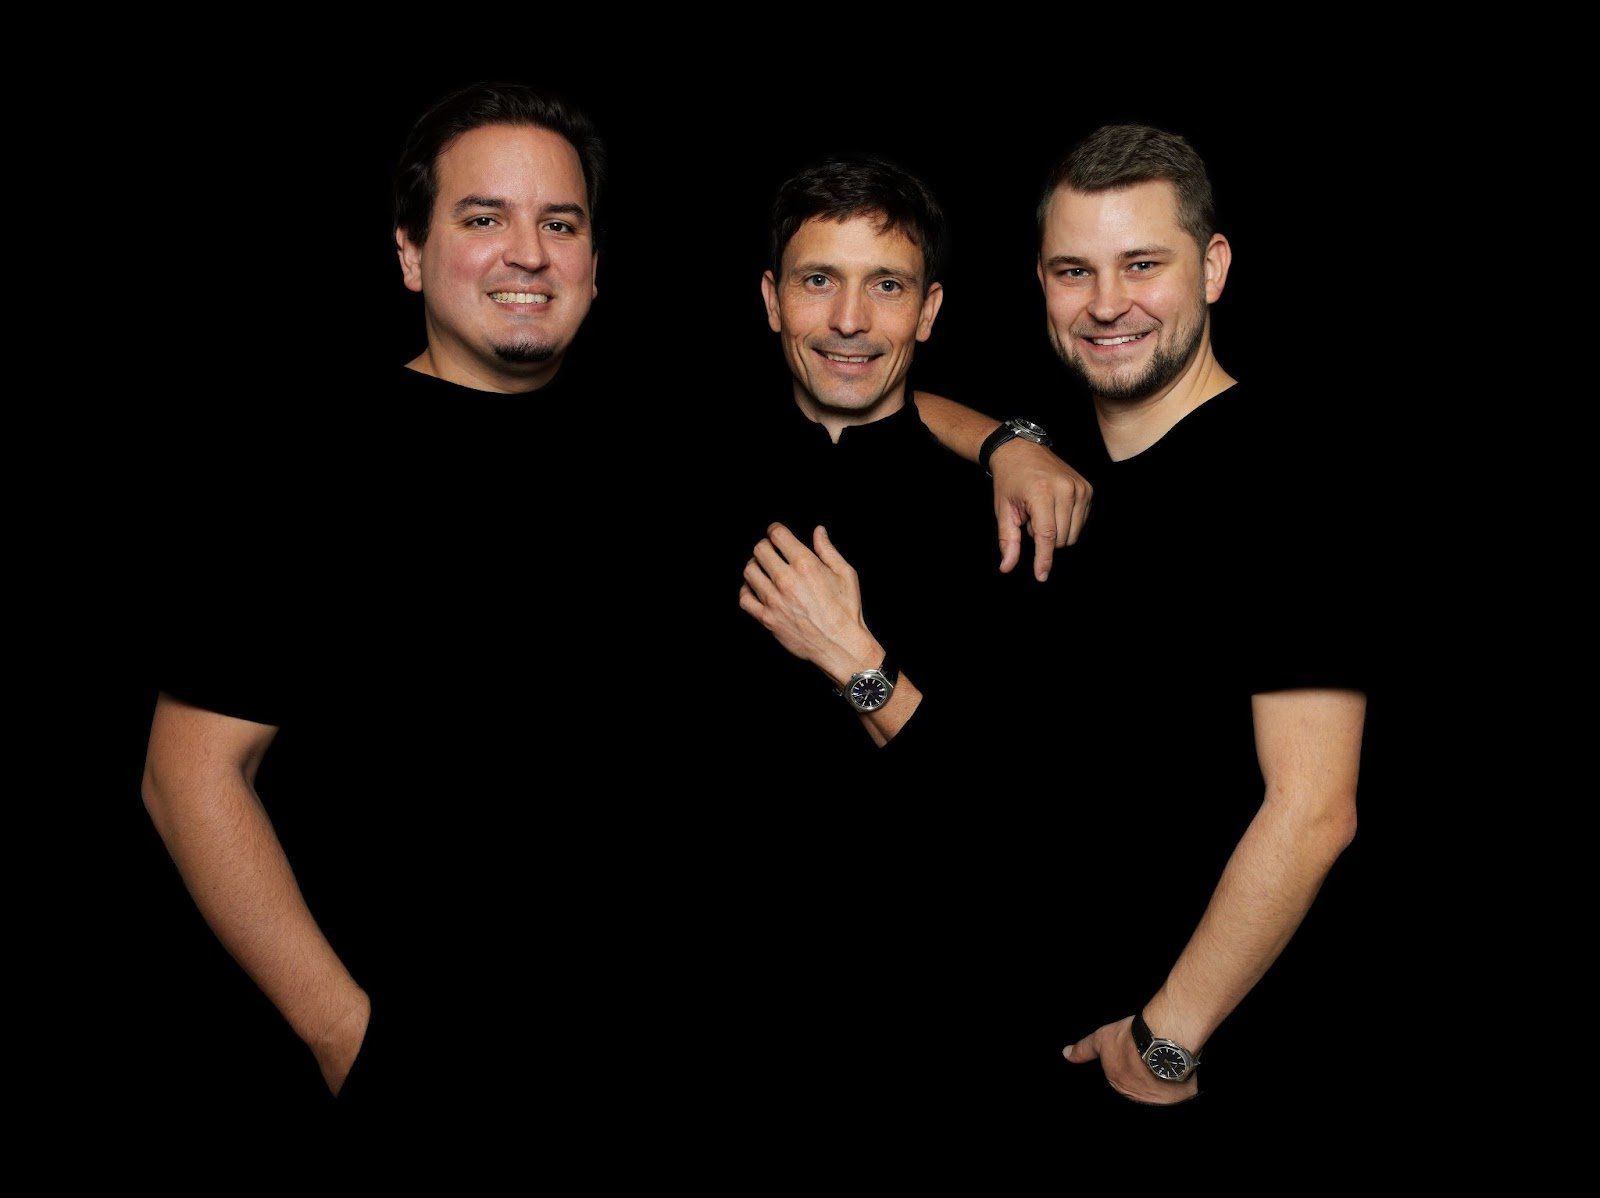 From left to right : Cédric Mulhauser (co-founder and watchmaker), Singal Depéry (co-founder and artistic director), Nicolas Freudiger (co-founder and CEO). 